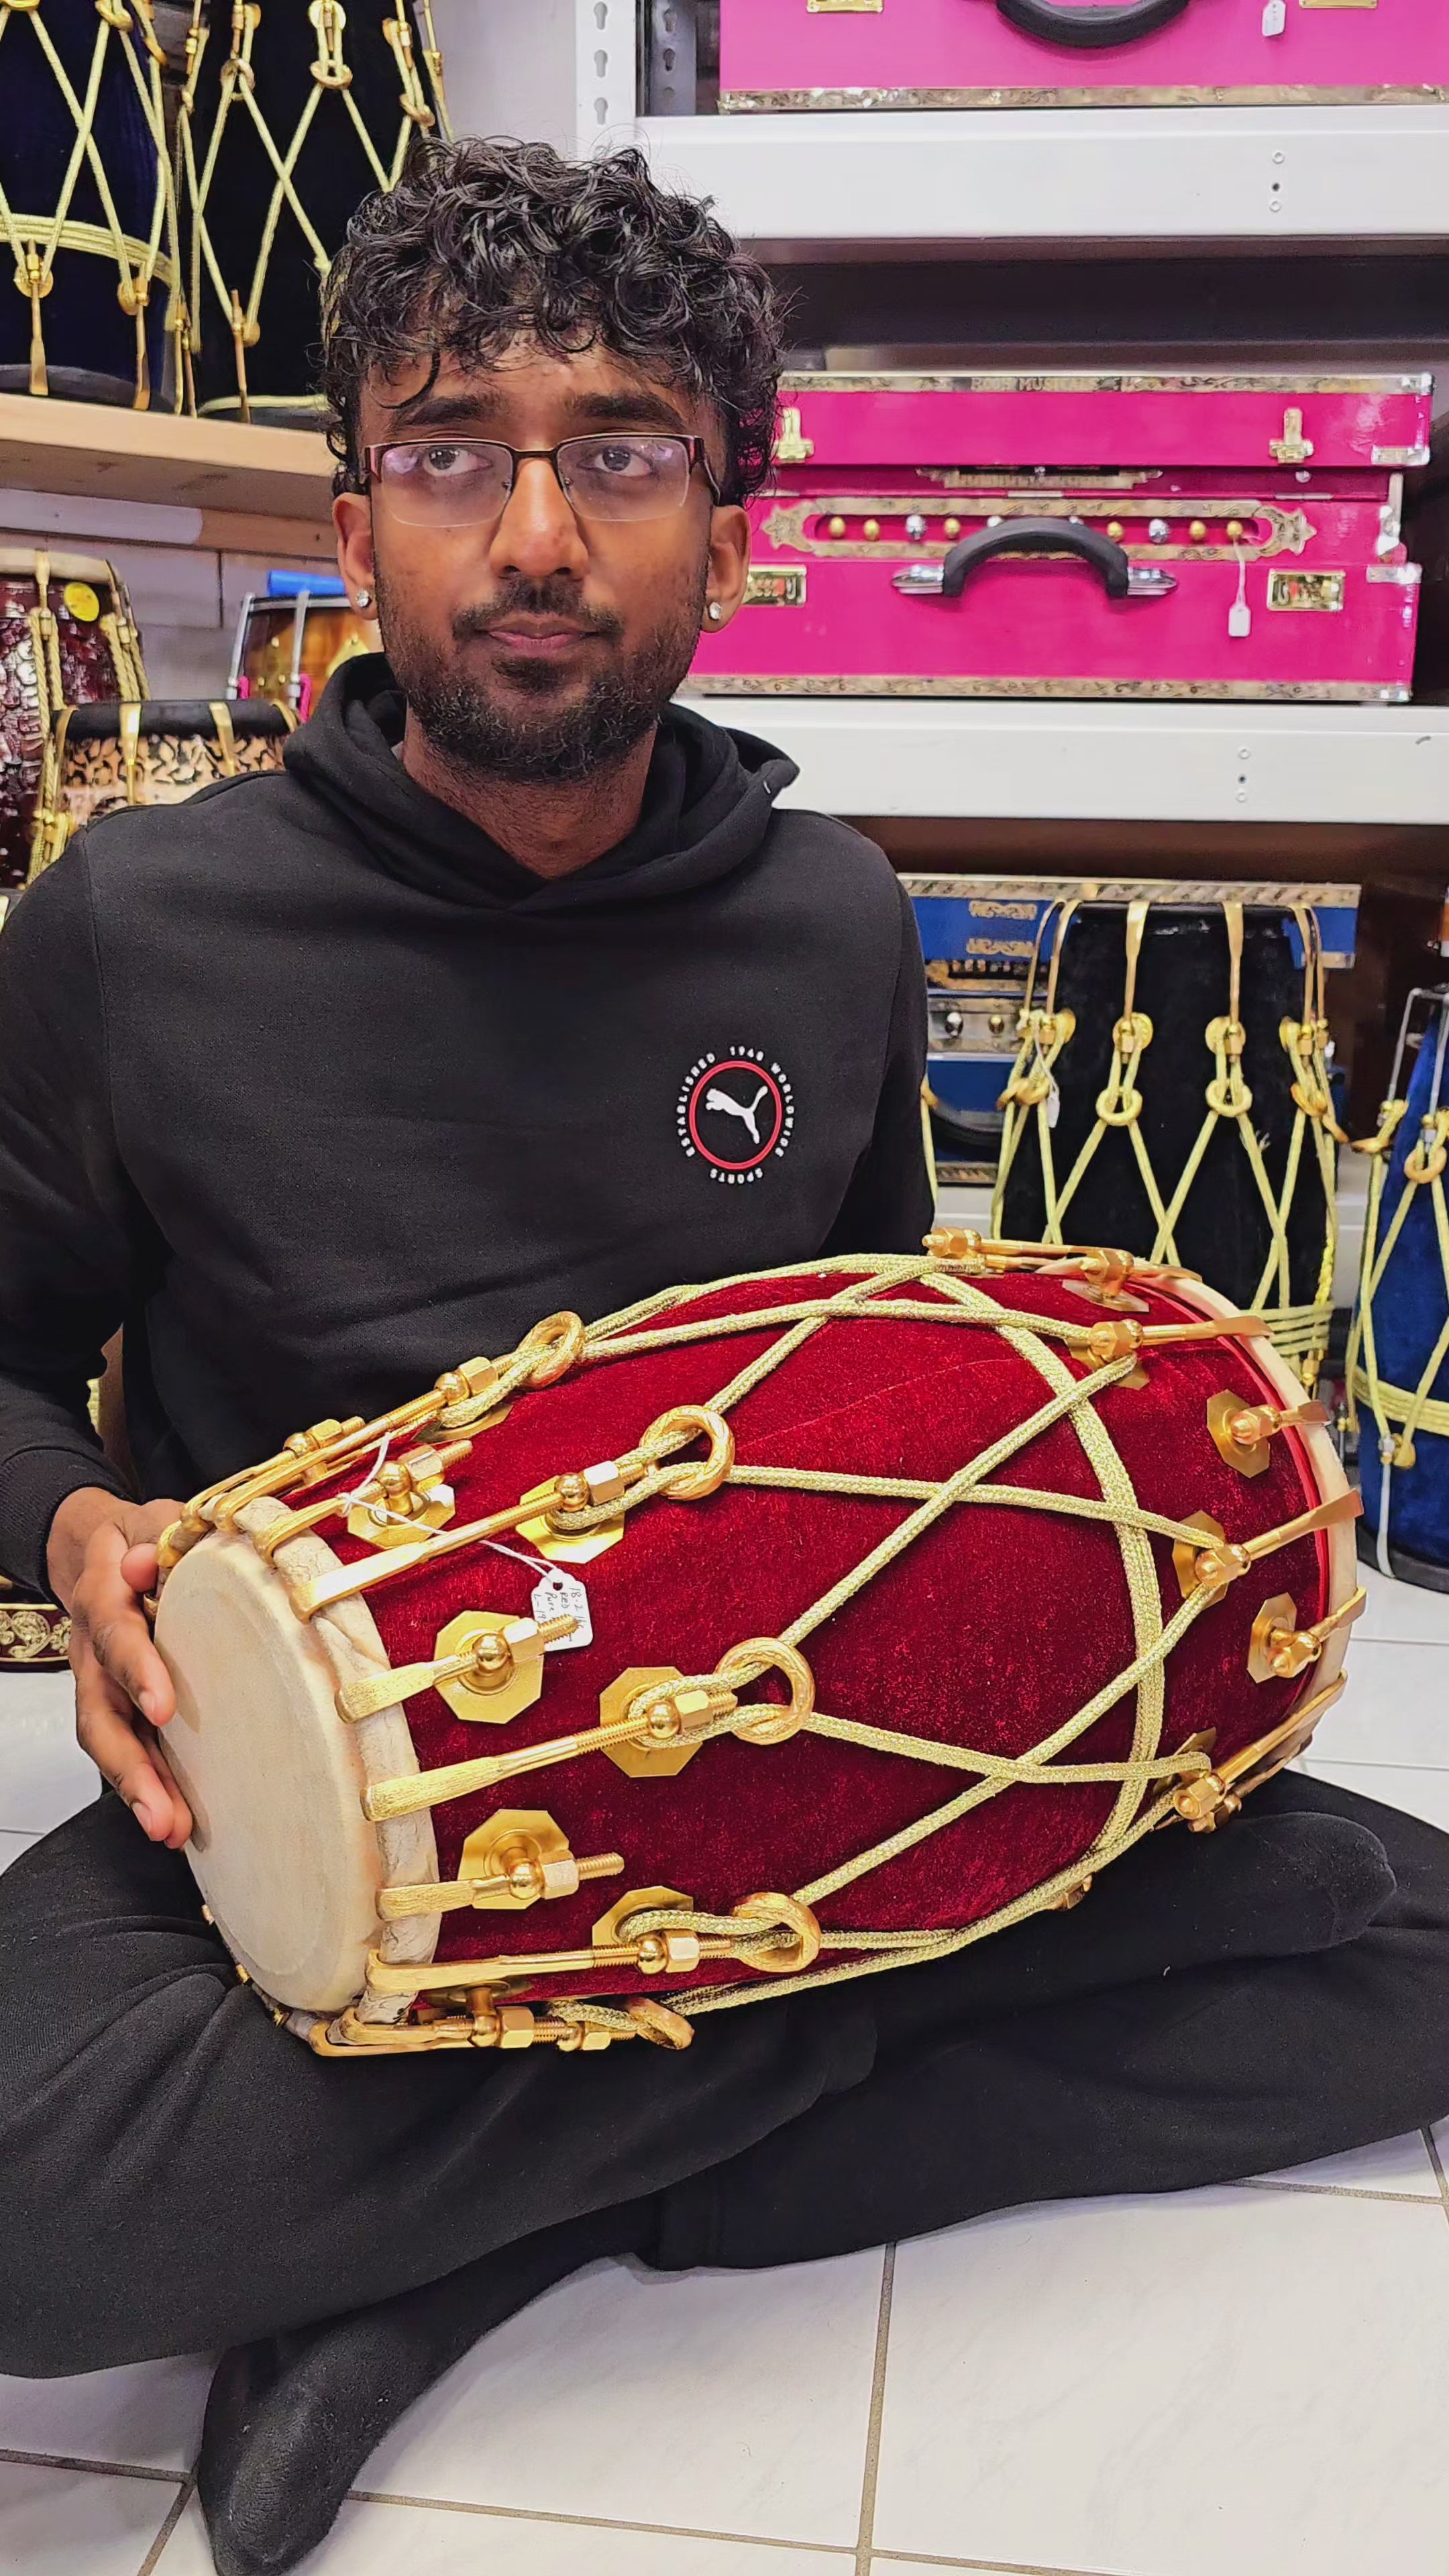 Regal Resonance: 36-Bolted Red Velvet Wrapped Red Sheesham Dholak with Golden Pure Brass Bolts and Ropes Design